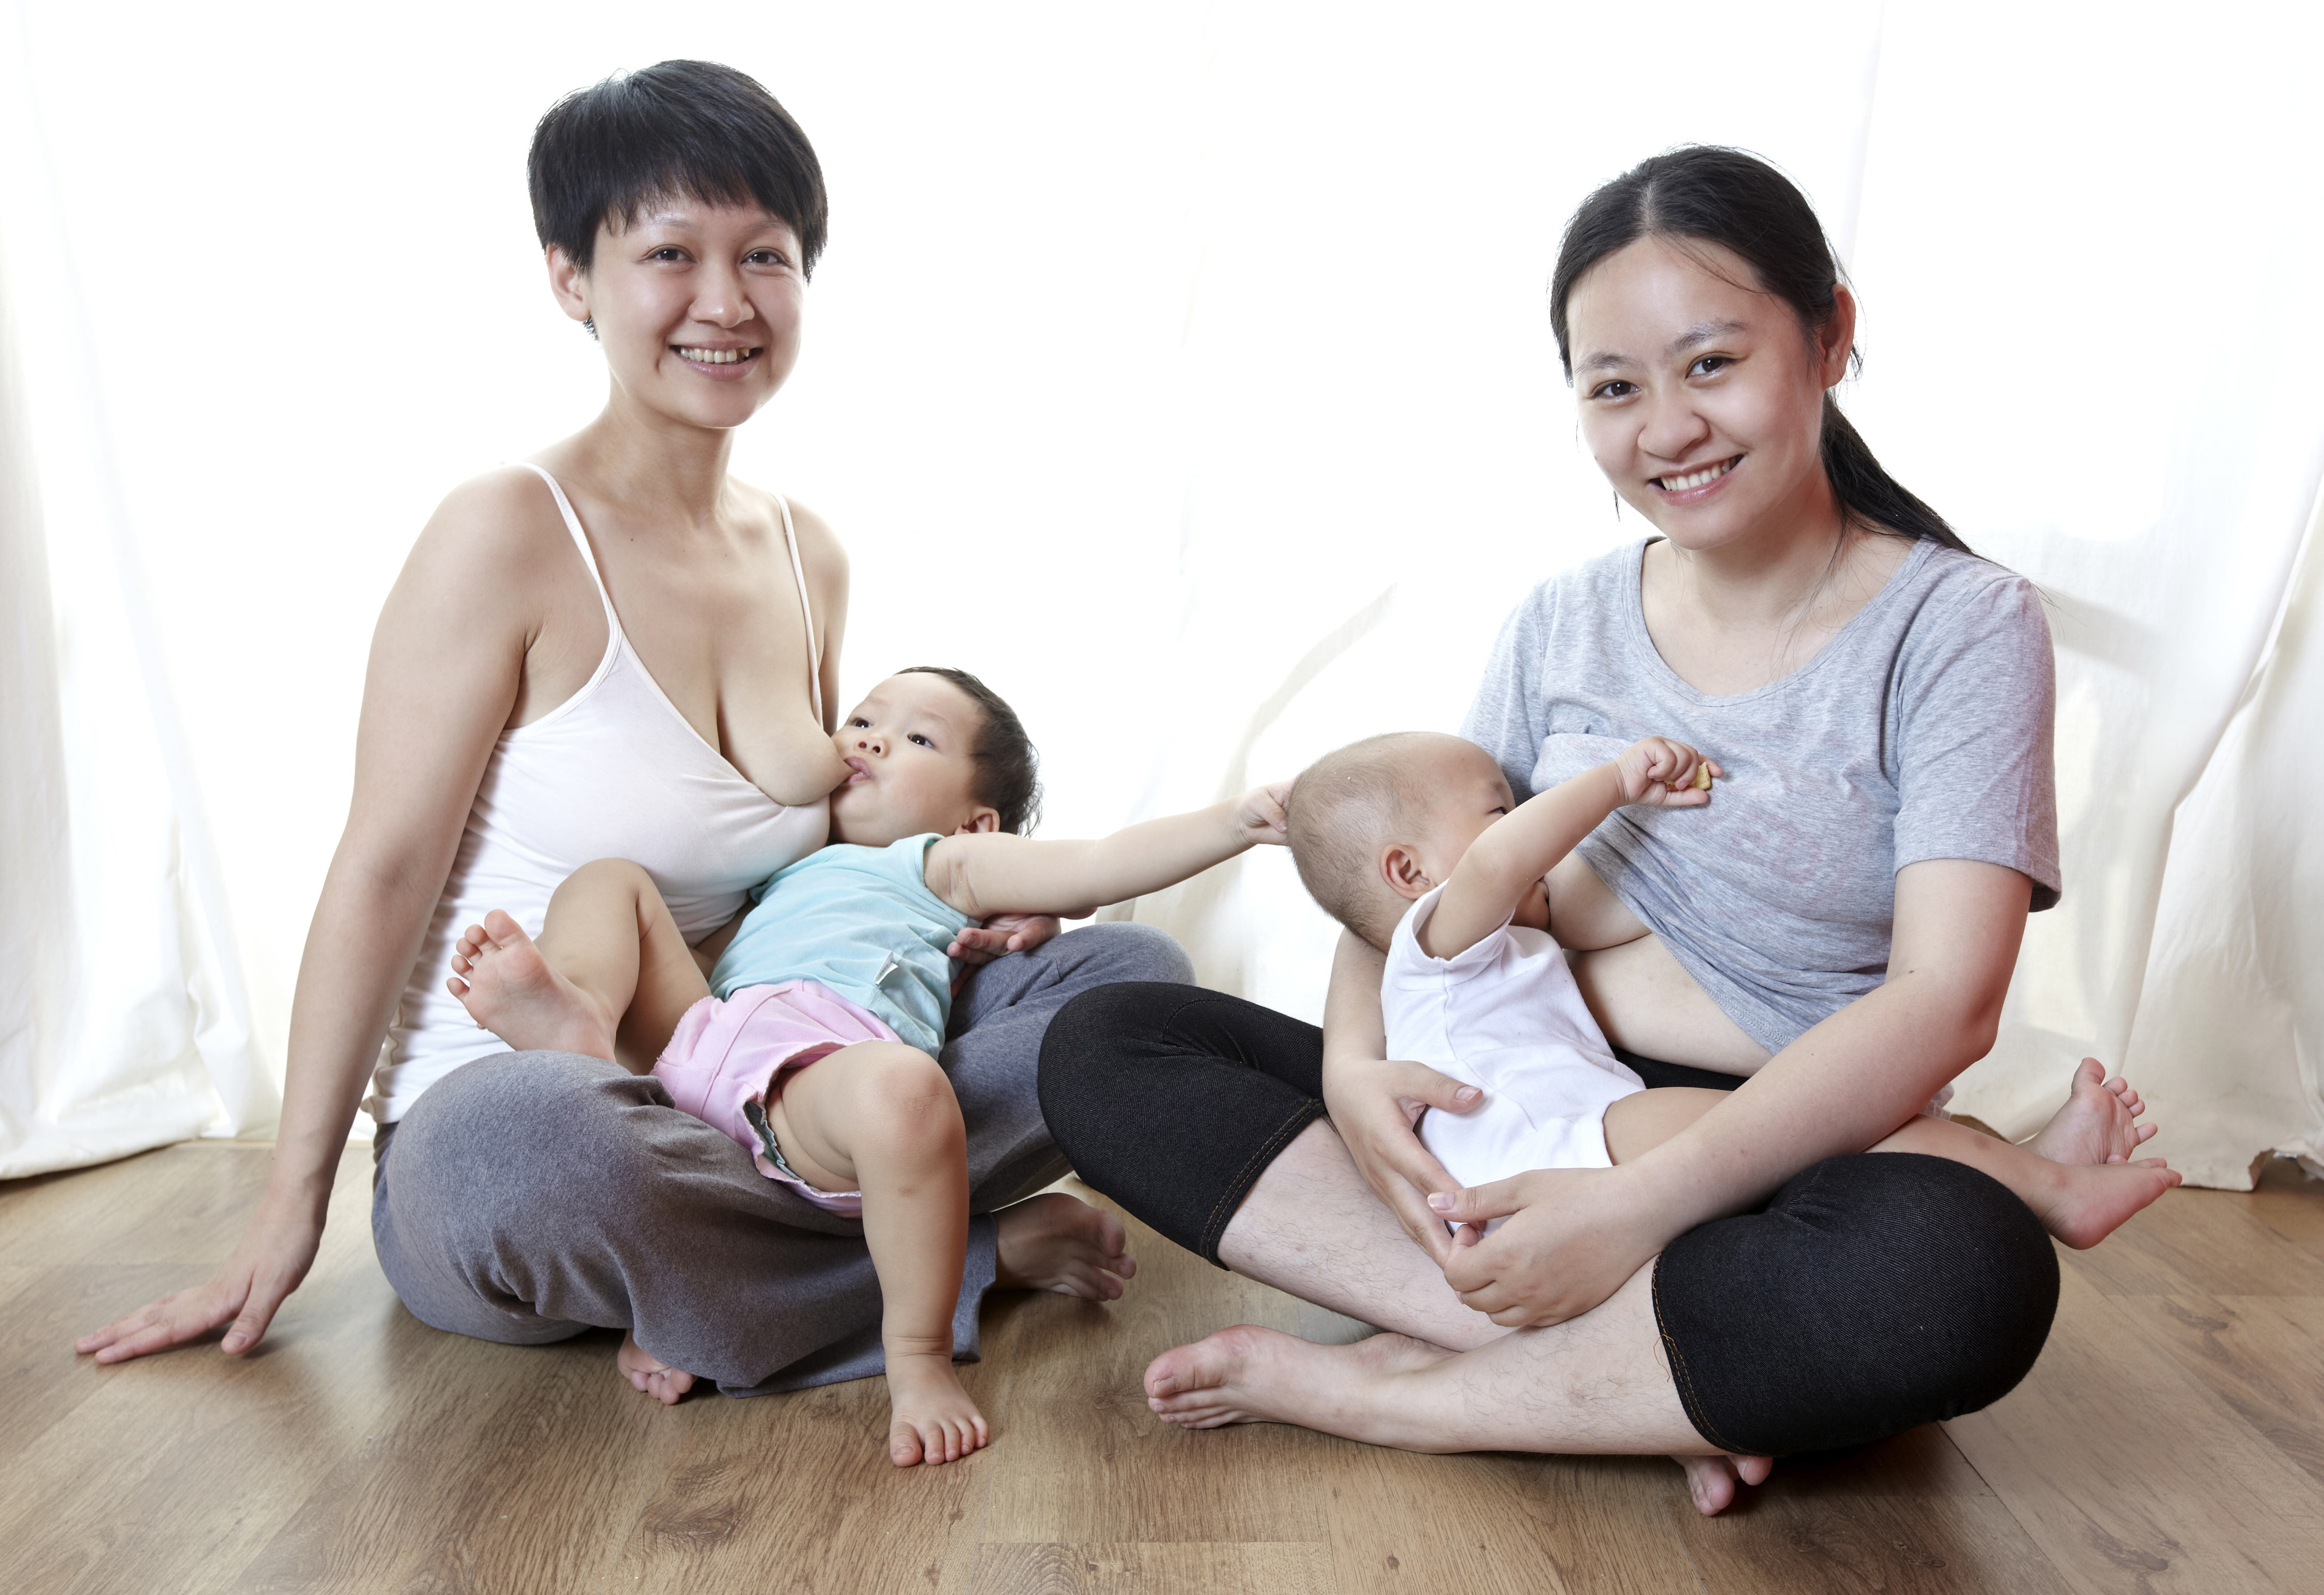 two mothers smiling while seated on a floor and breastfeeding their infants. one infant reaches for the other